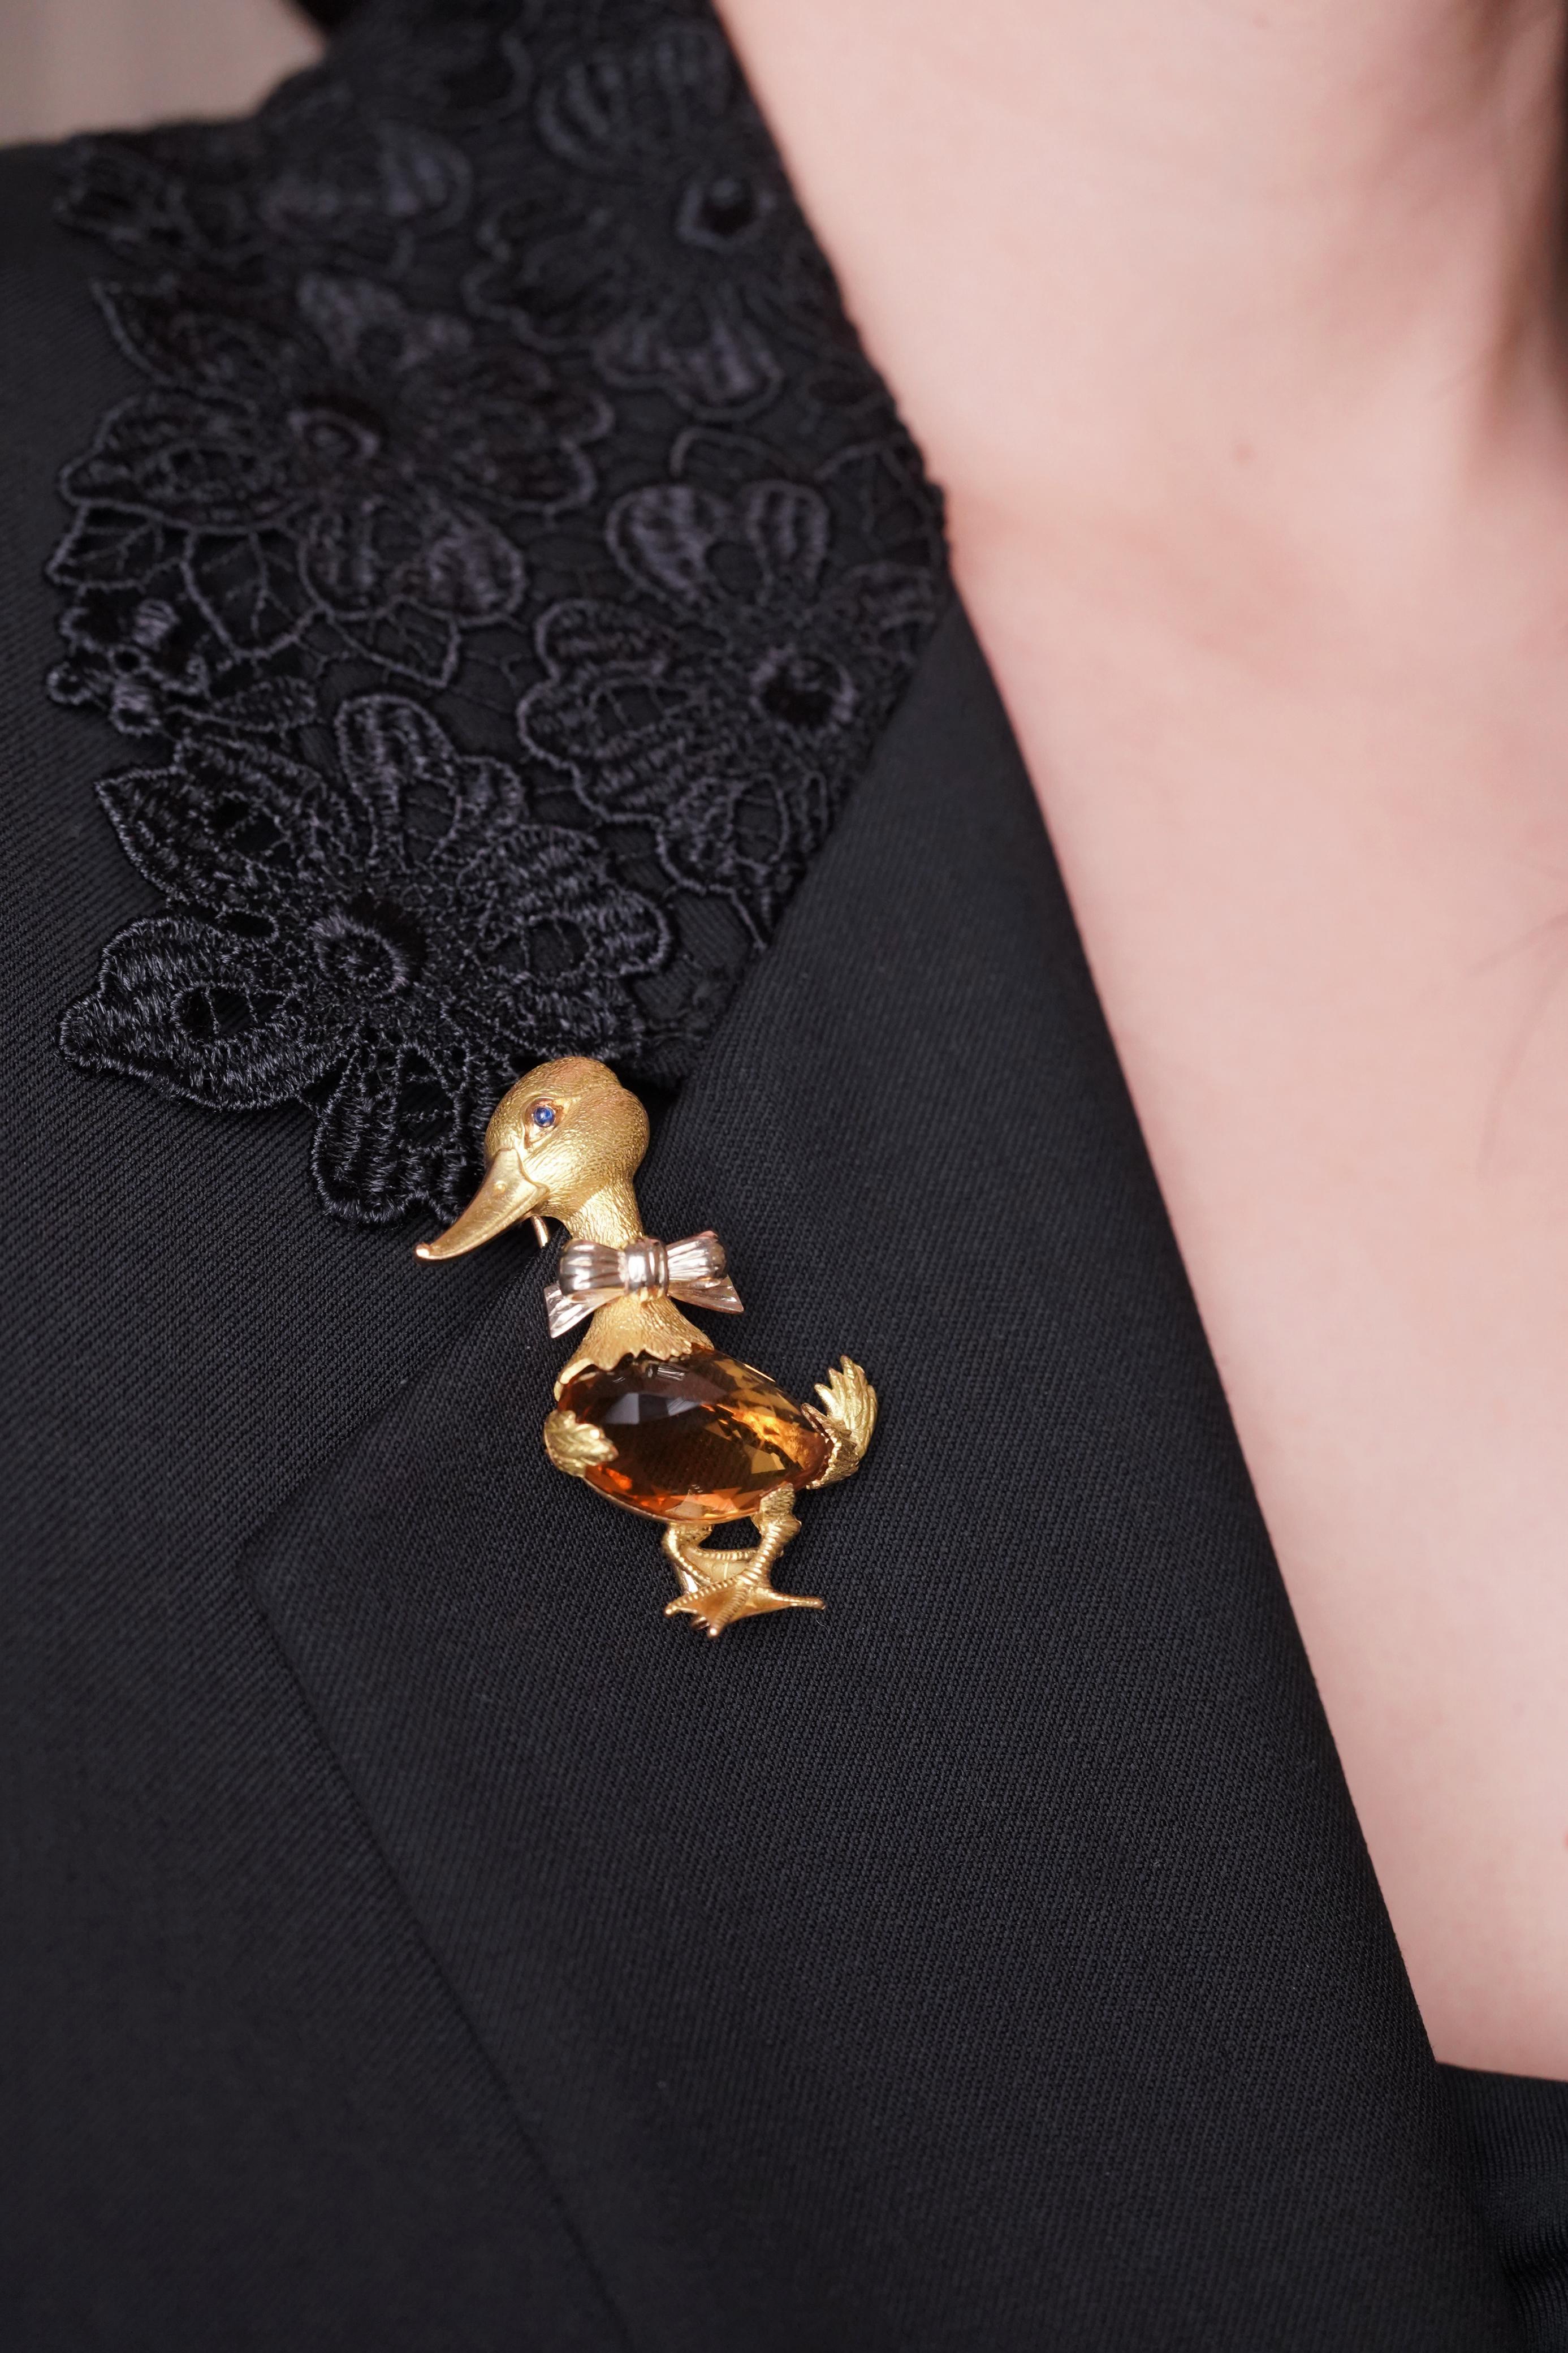 Introducing the exquisite 1960s signed Georges Lenfant dress clip/Brooch of Mr D Duck with attitude.
This brooch is a masterpiece of jewellery design, showcasing the exquisite craftsmanship and artistic vision of Georges Lenfant - one of the more